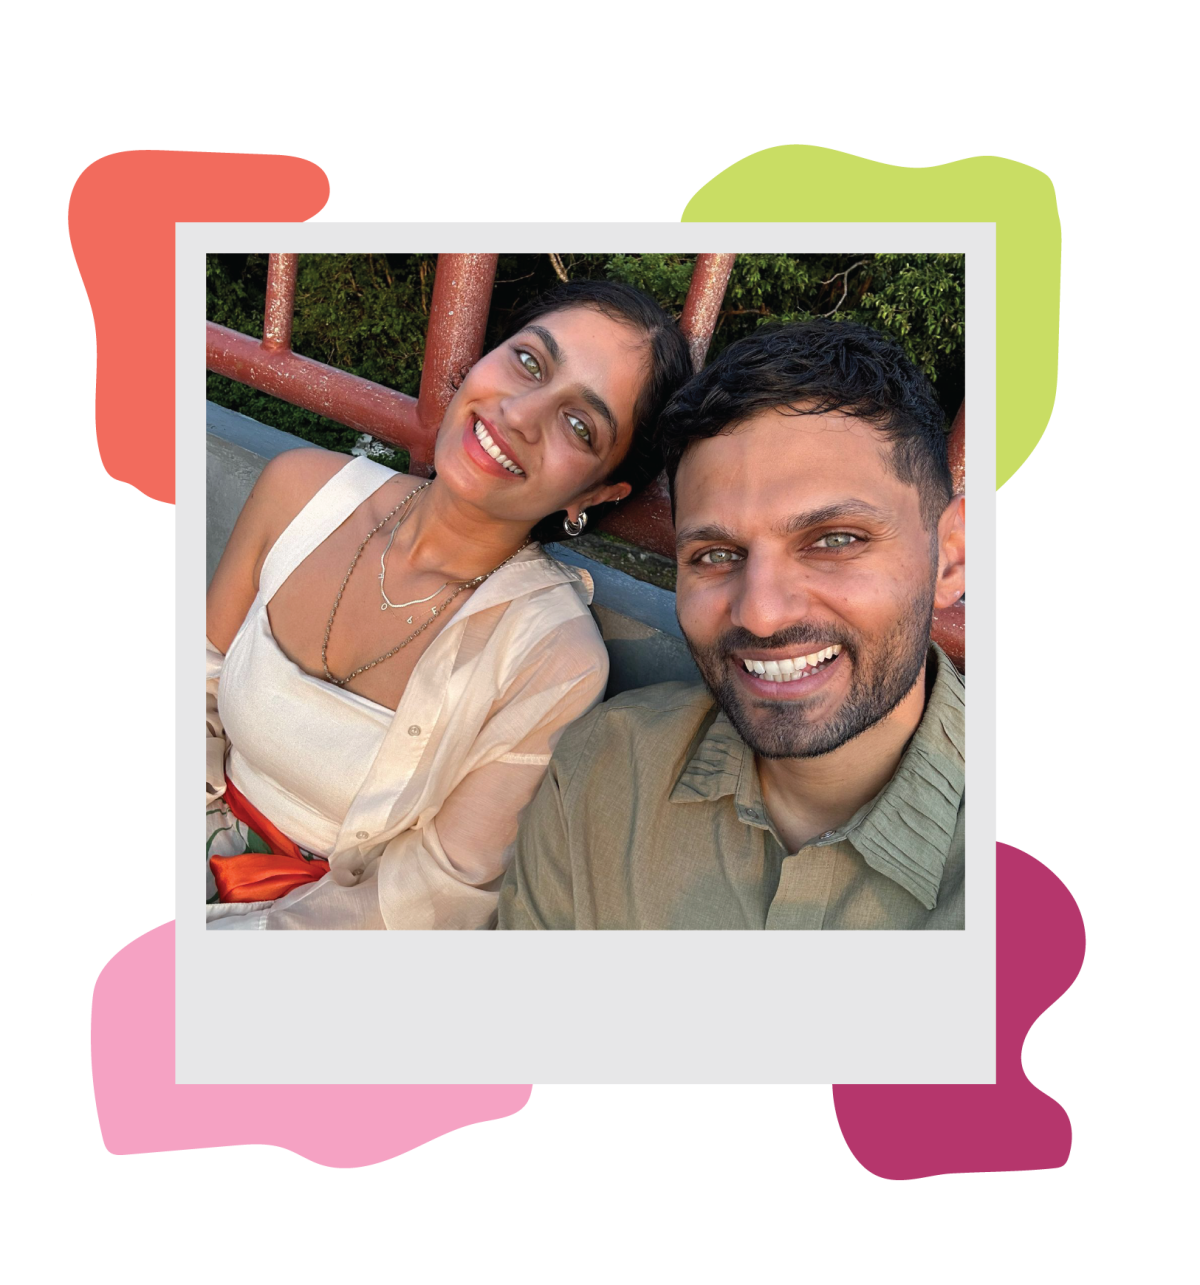 Photo illustration in shape of polaroid photo of a man and woman smiling, with colorful shapes behind the corners.